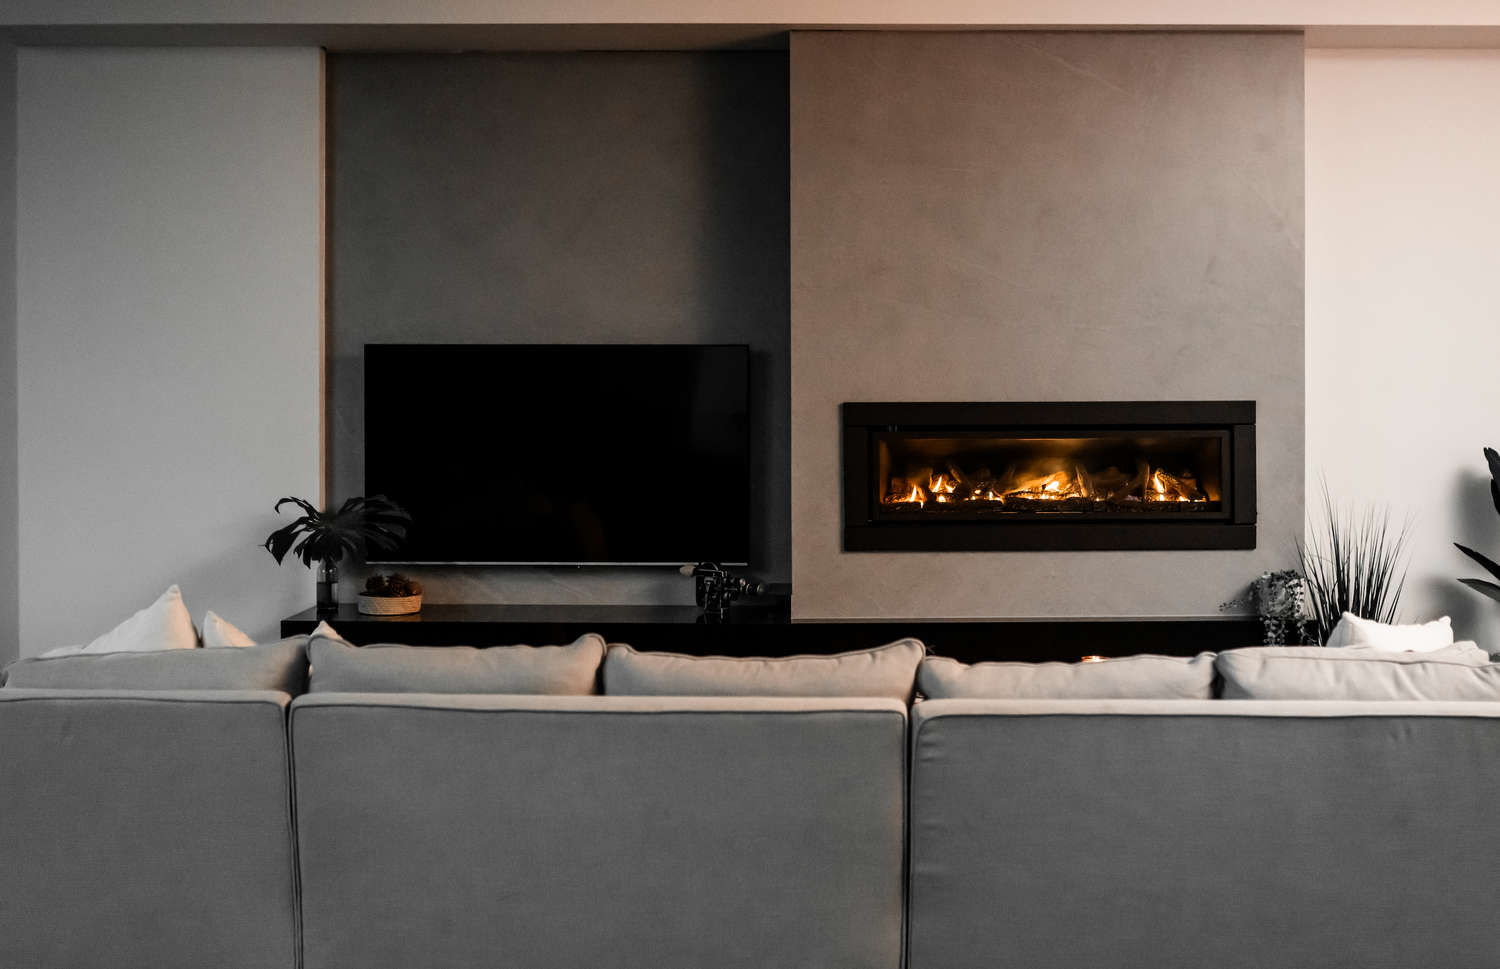 Servicing Your Gas Log Fireplace